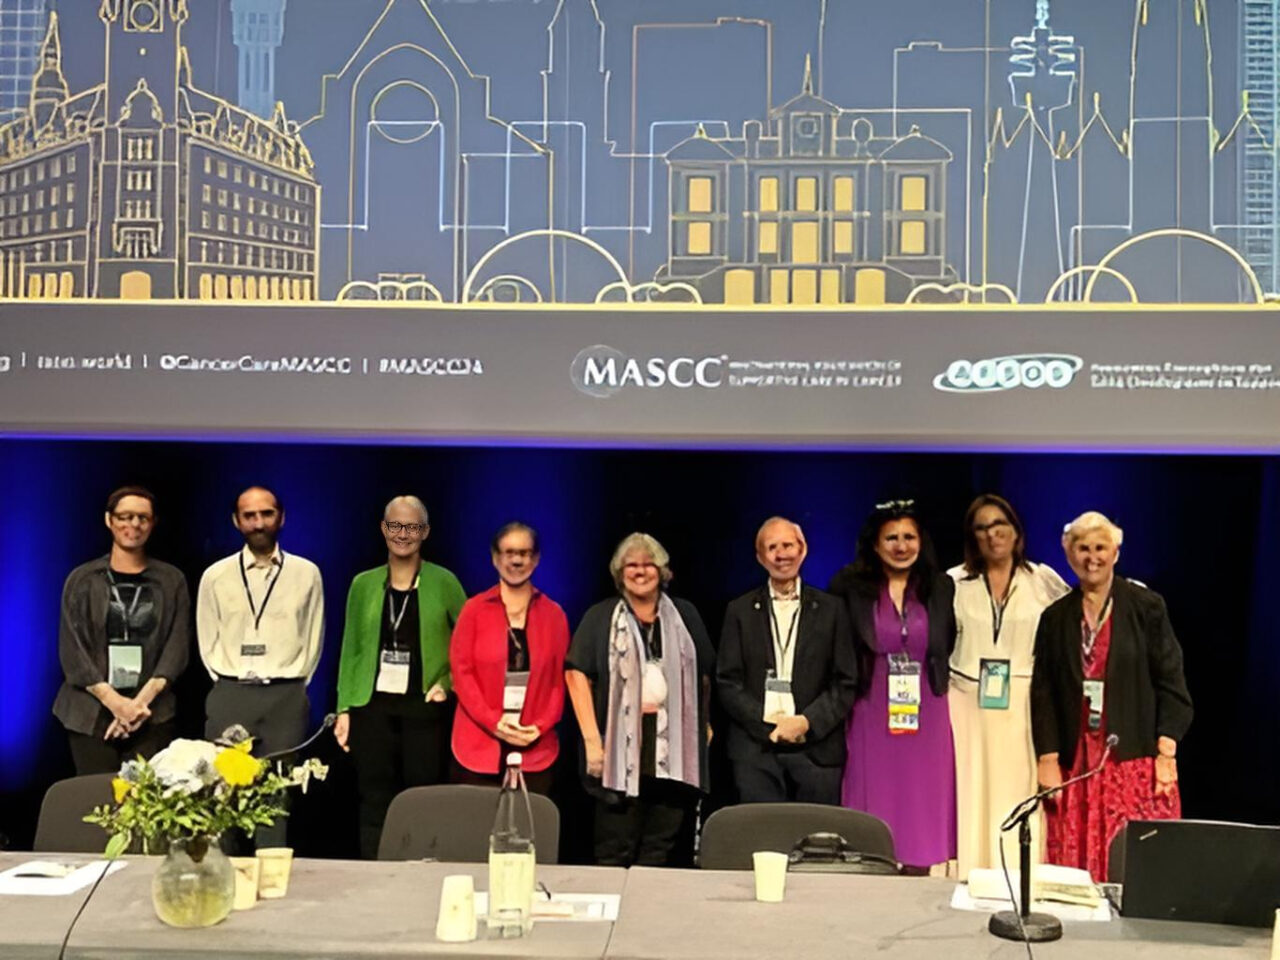 Highlights from Day 1 of MASCC24